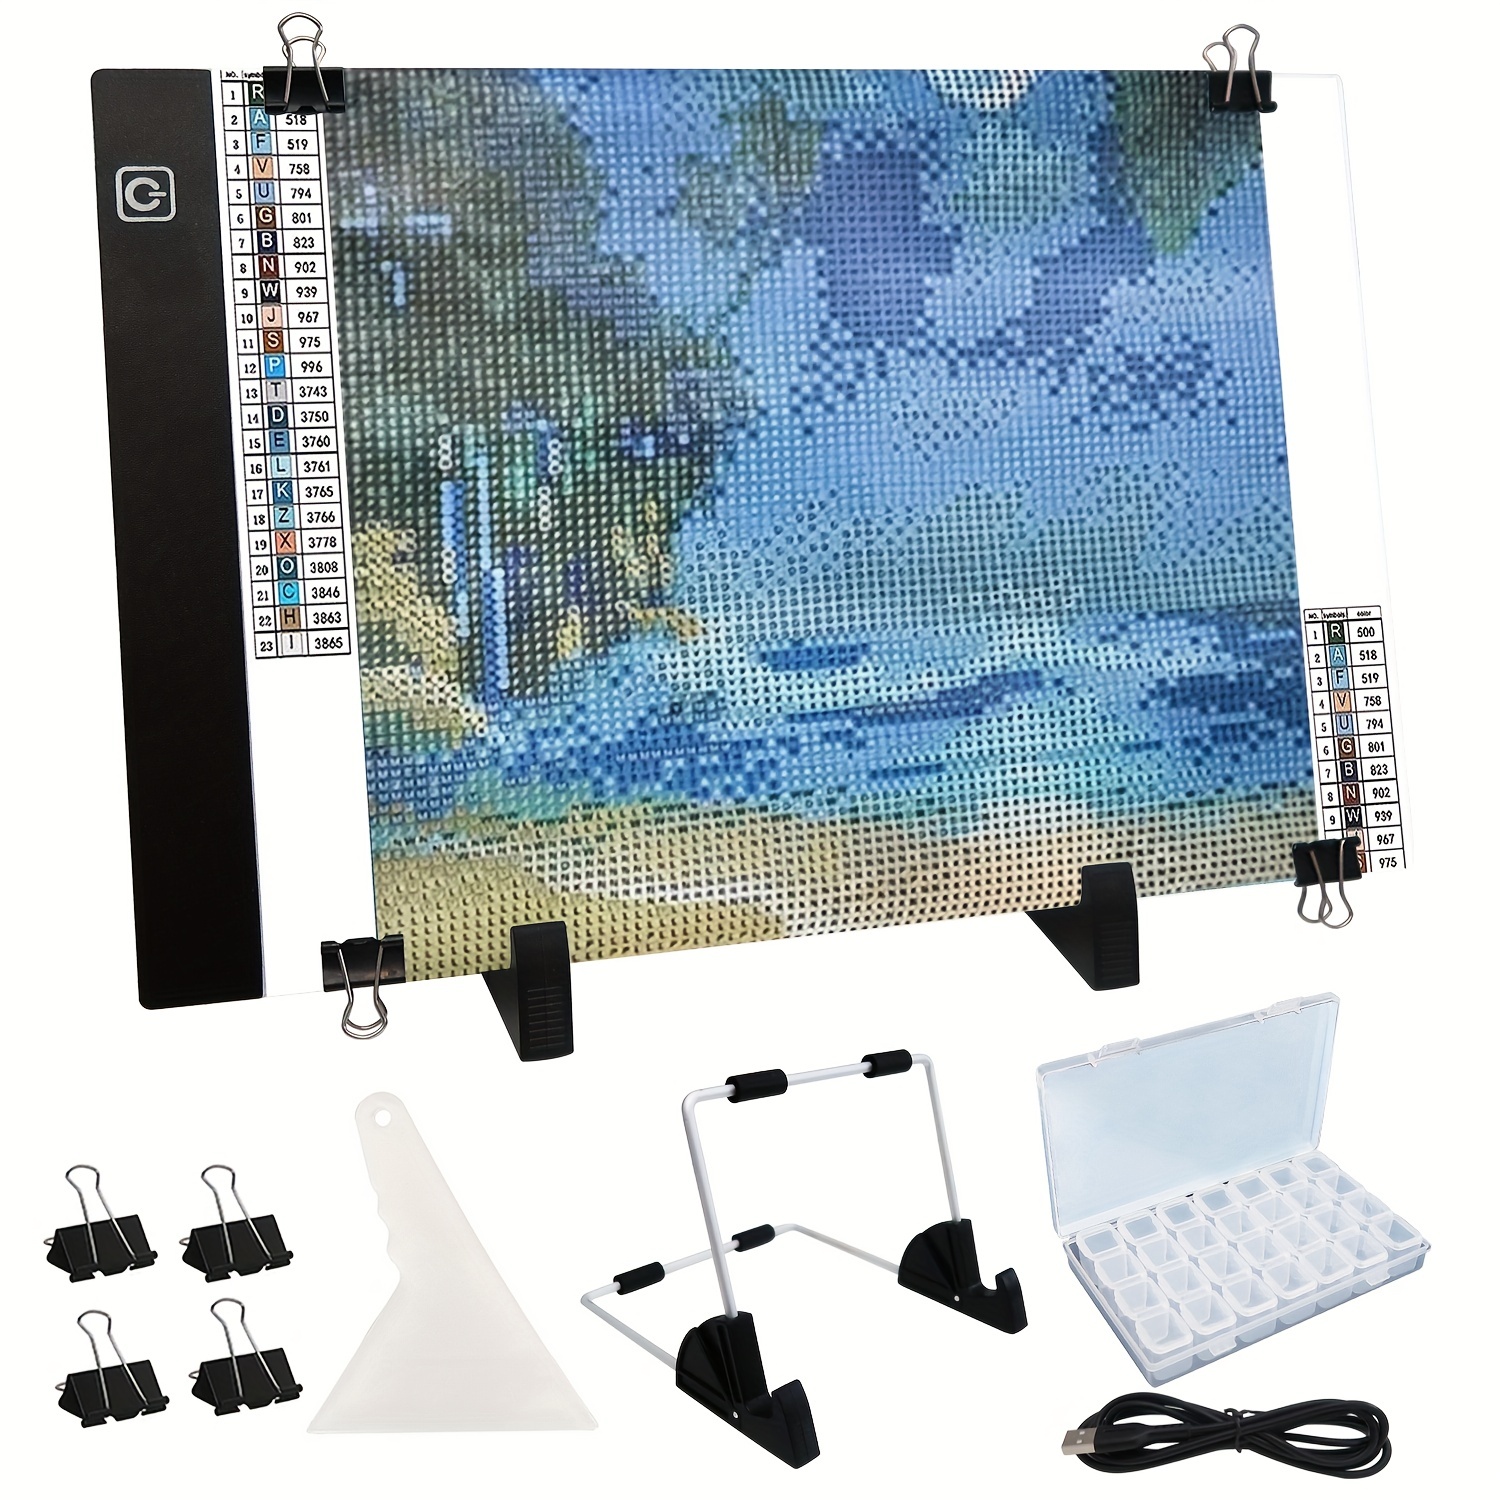  A4 LED Light Pad for Diamond Painting, Super Bright USB Powered  Light Board Kit with Detachable Stand, and Black Pad Clip (Pad and Bag)